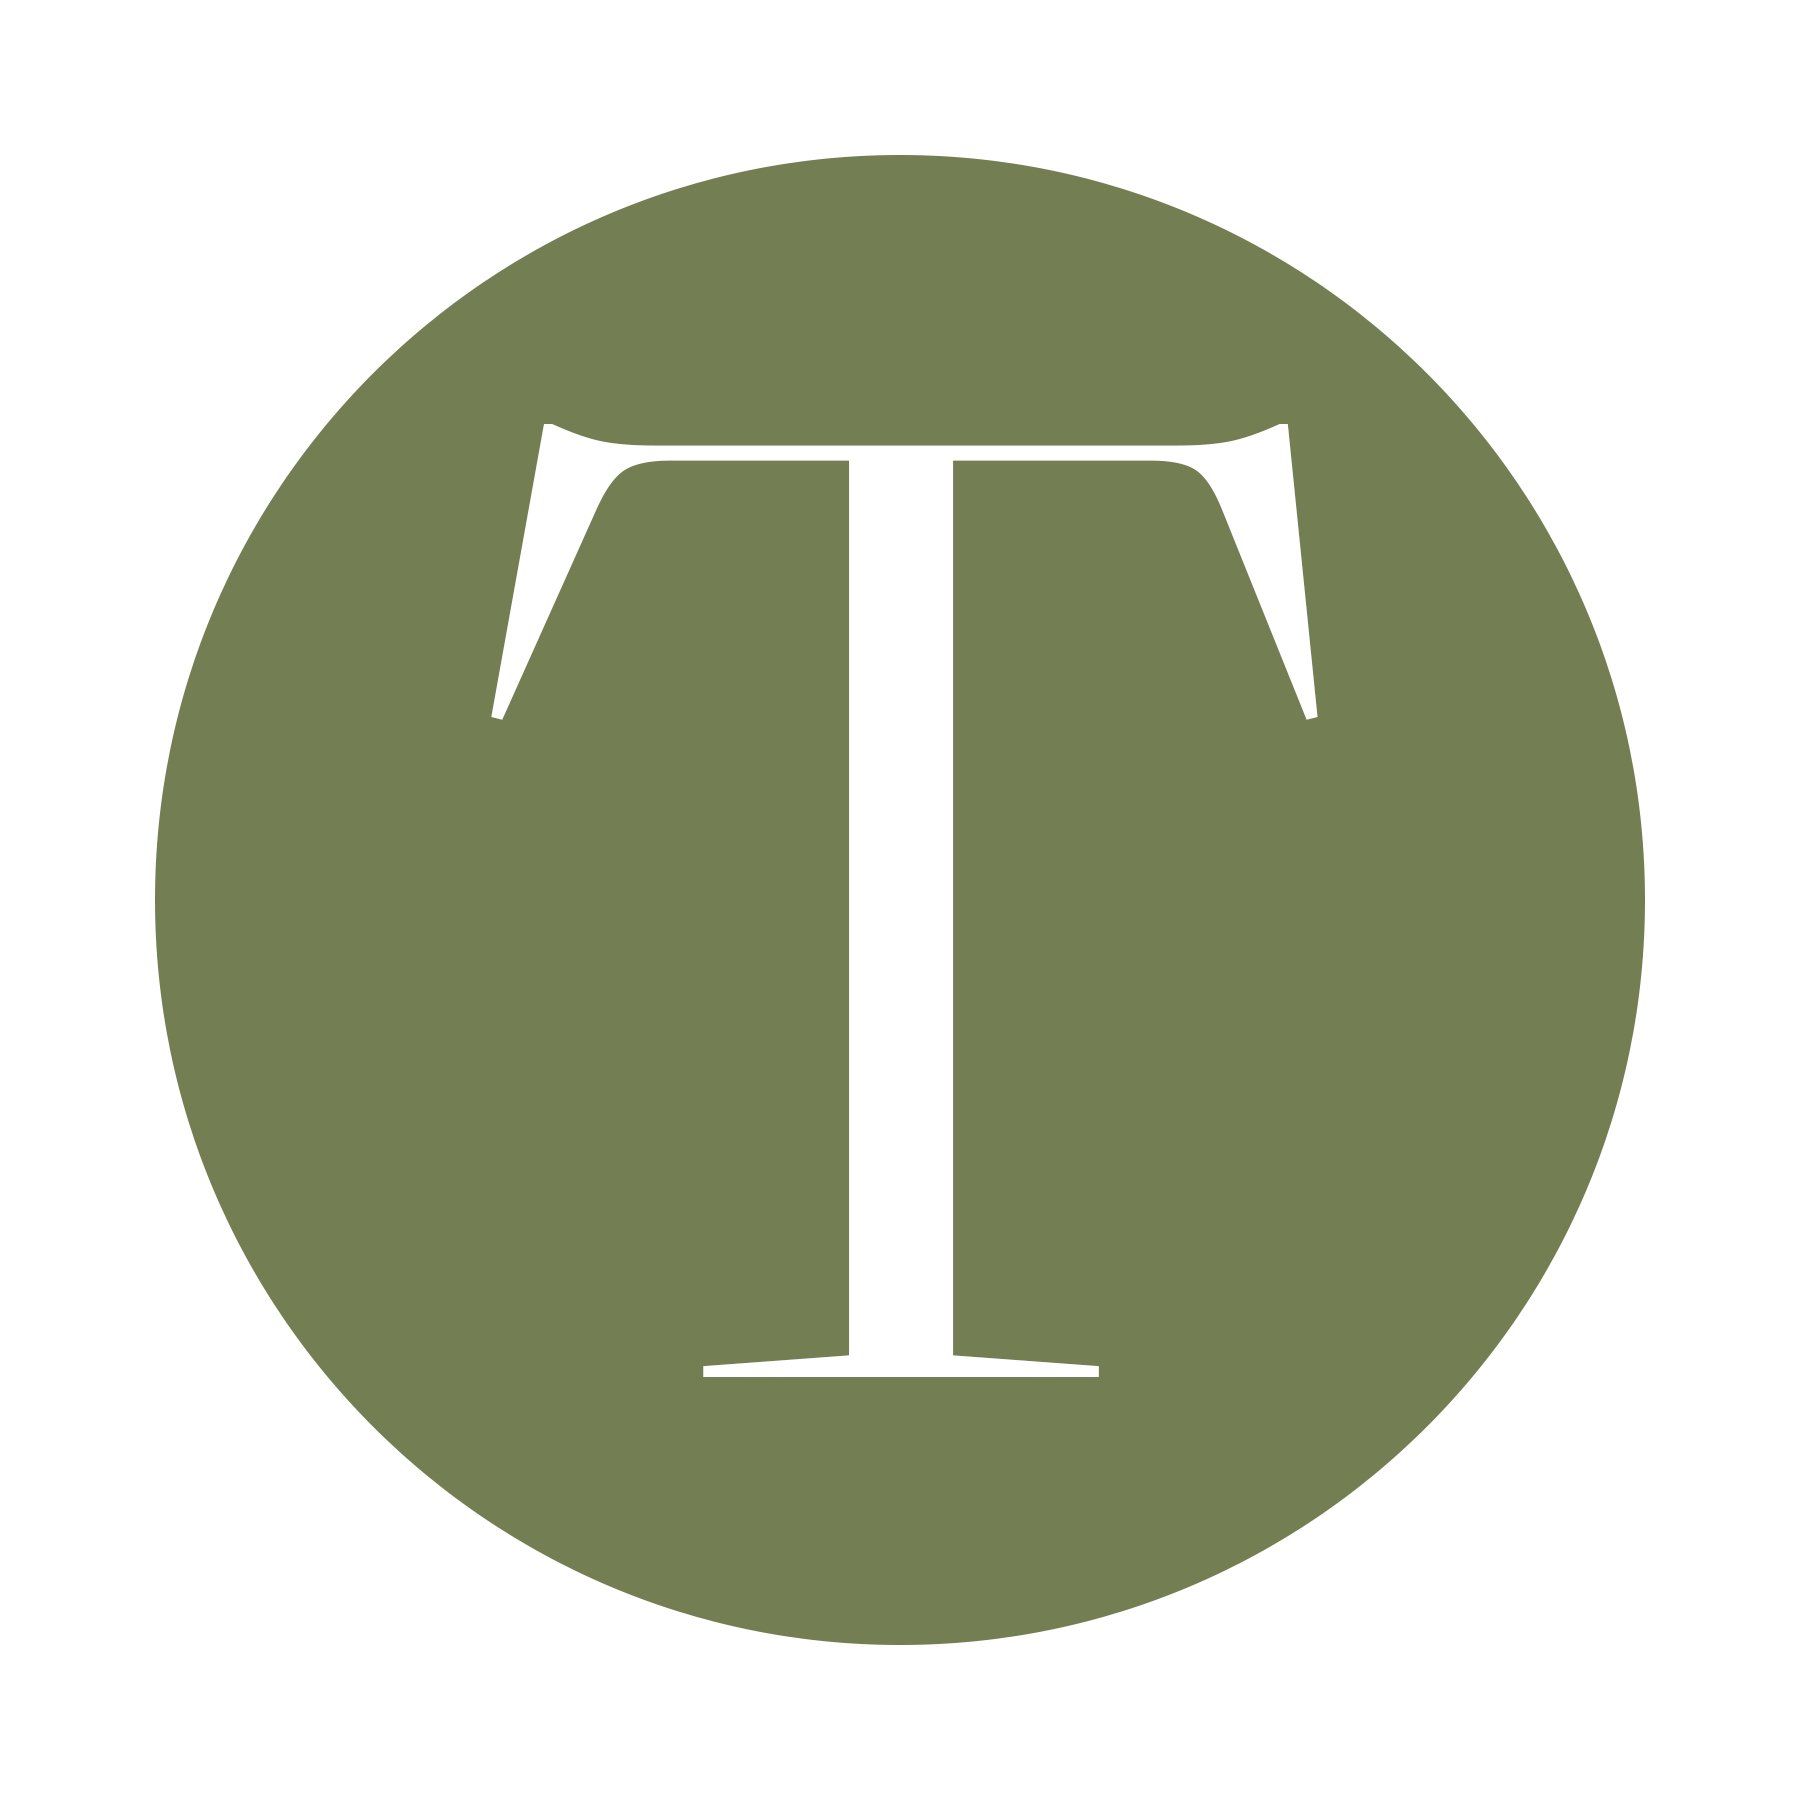 tamarack logo - The letter t is in a green circle on a white background.